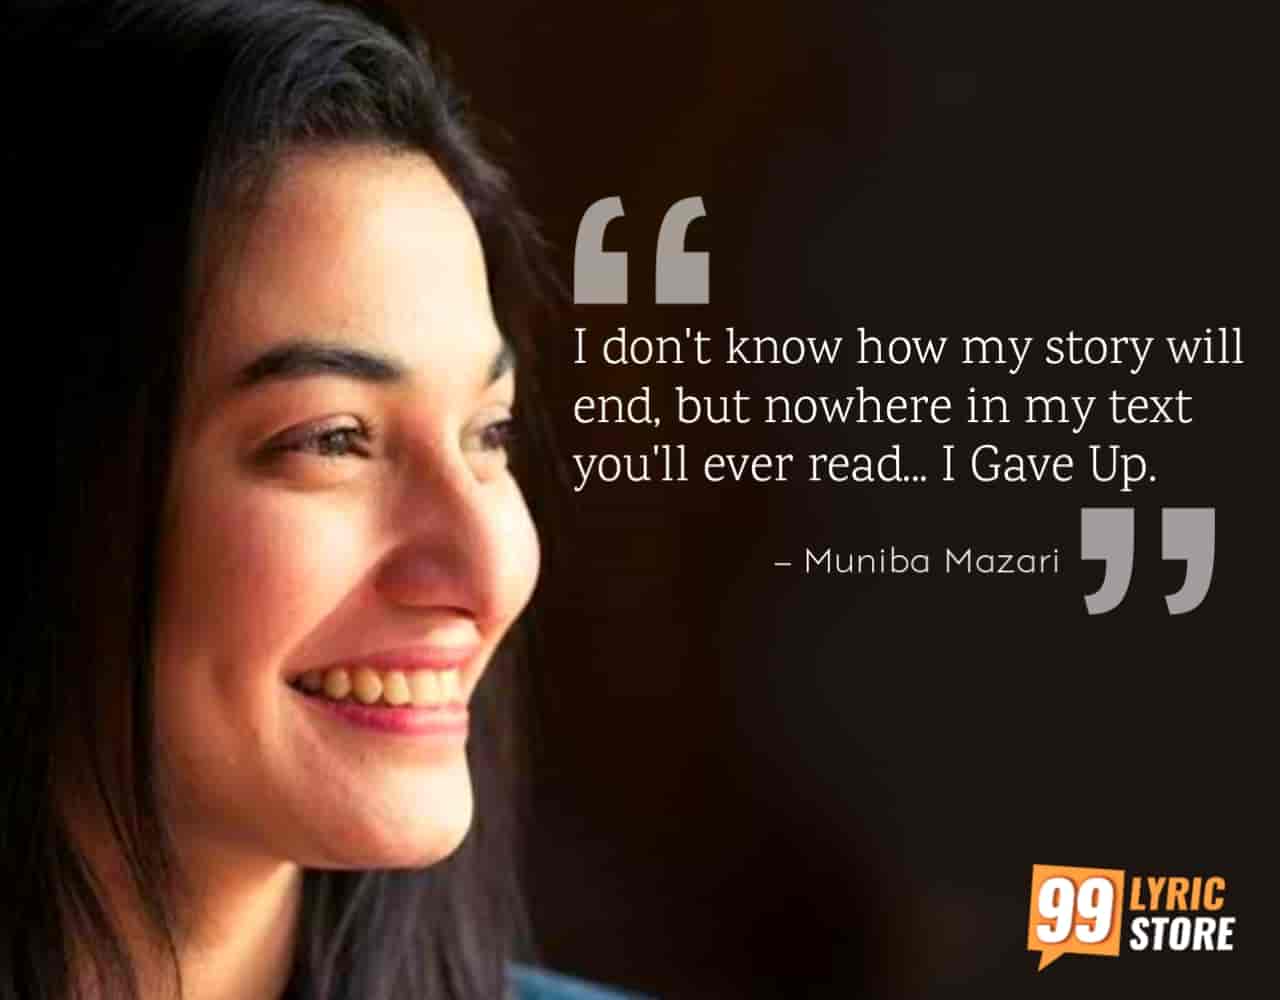 Motivational speaker Muniba Mazari gave another motivational speech which is very inspiring and also tells the life lessons of never giving up in life.